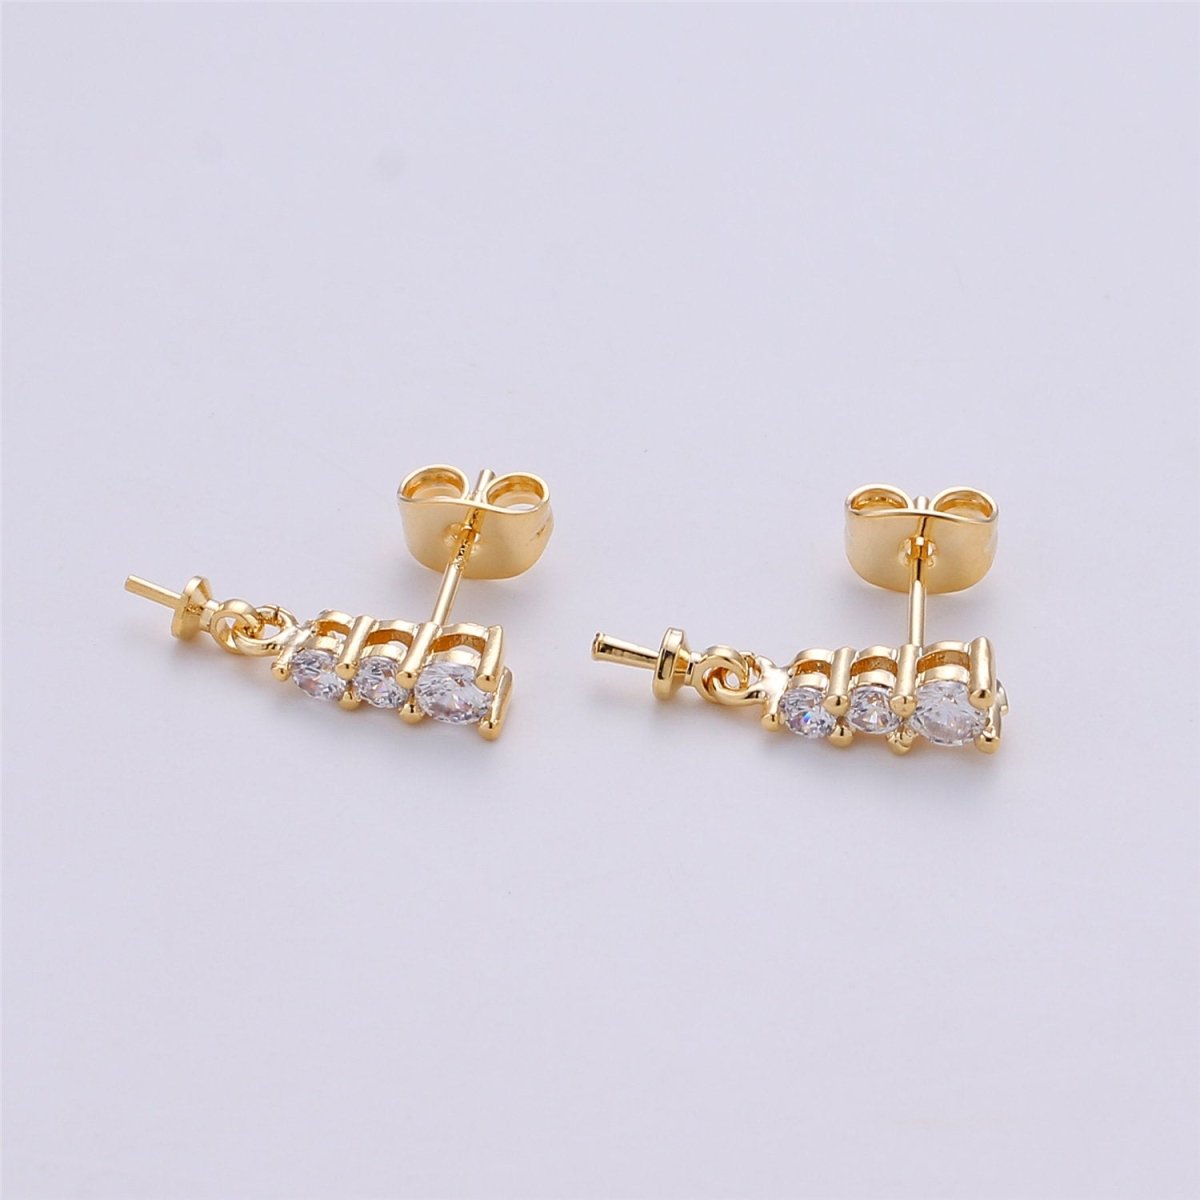 One Pair-14k Gold Filled Heart Post Earring Findings, DIY Earring Mount,Half Drilled Pearls Cubic Stud Earring Settings Component K-416 - DLUXCA